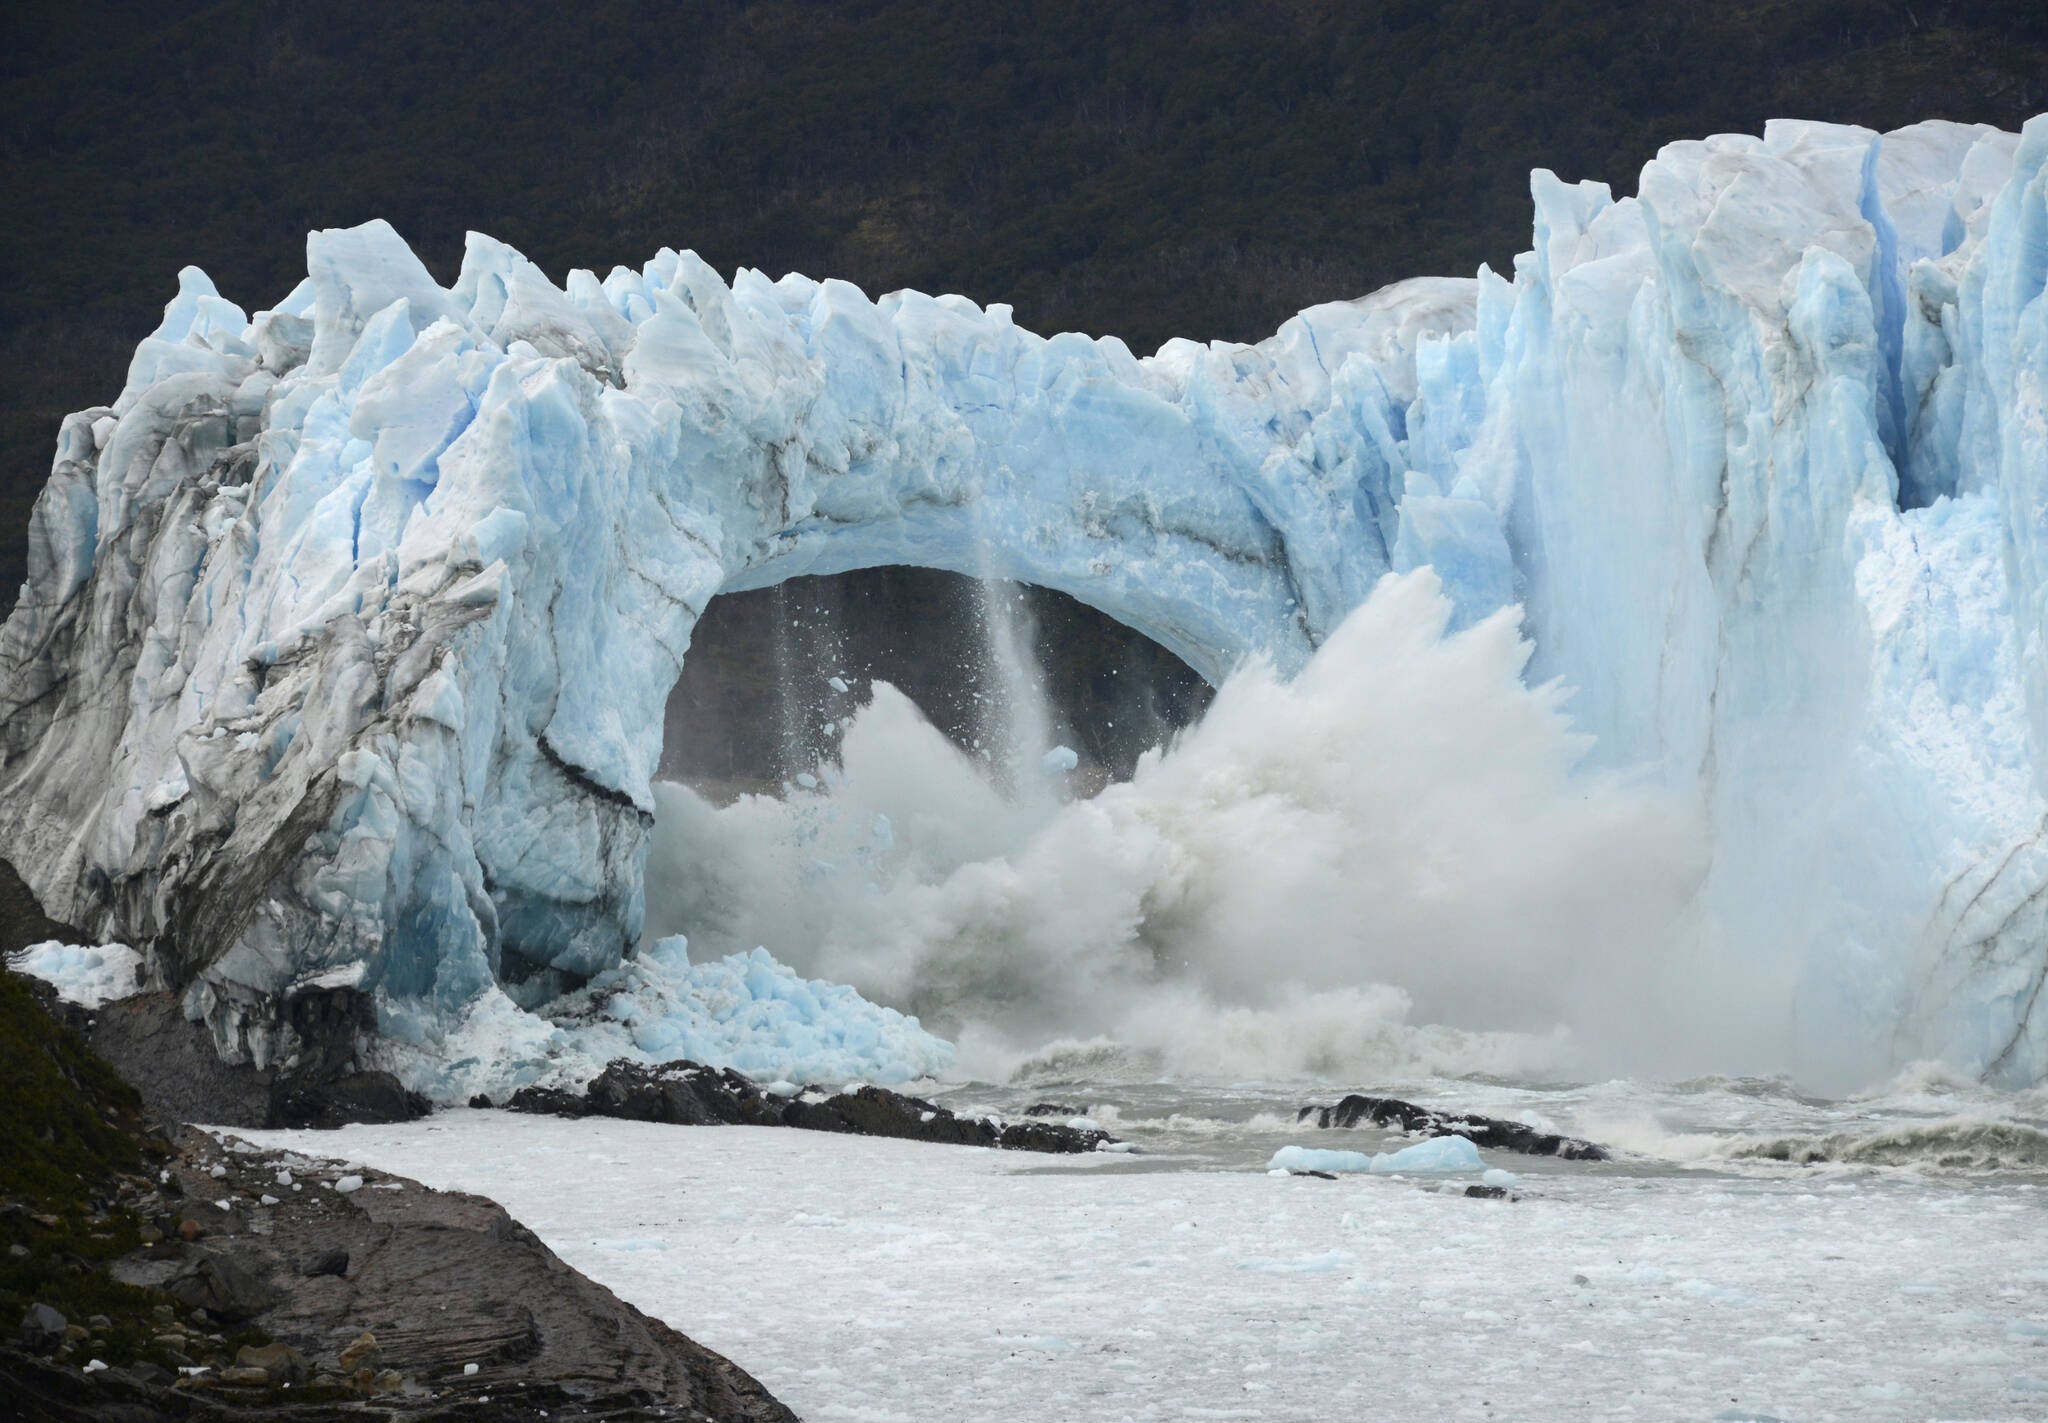 Chunks of ice break off the Perito Moreno Glacier, in Lake Argentina, at Los Glaciares National Park, near El Calafate, in Argentina’s Patagonia region, March 10, 2016. As glaciers melt and pour massive amounts of water into nearby lakes, 15 million people across the globe live under the threat of a sudden and deadly outburst flood, a new study finds. (AP Photo / Francisco Munoz)